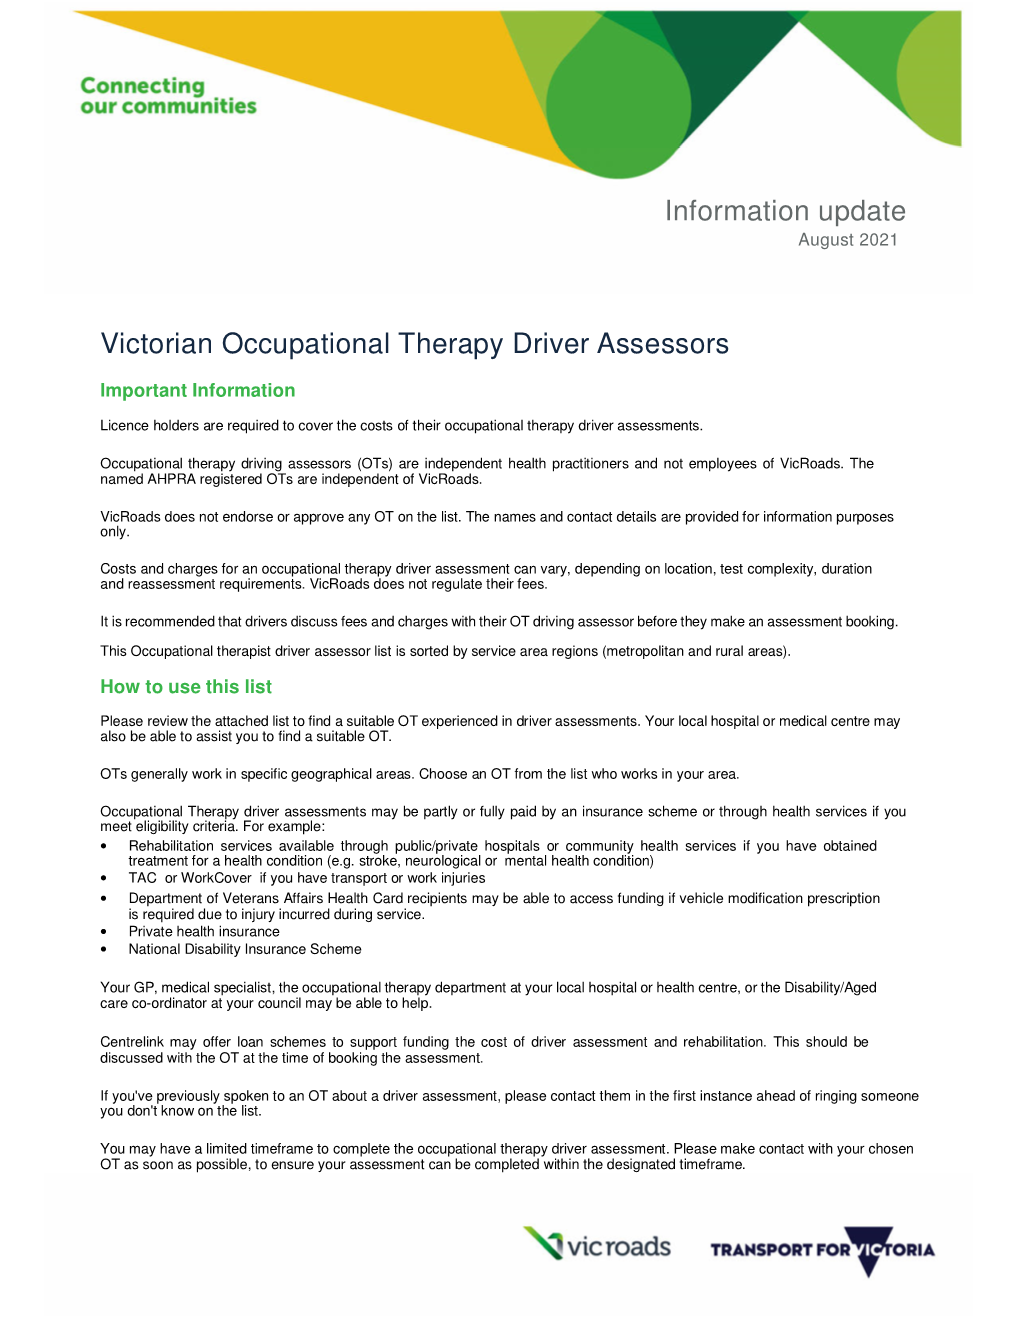 Victorian Occupational Therapy Driver Assessors